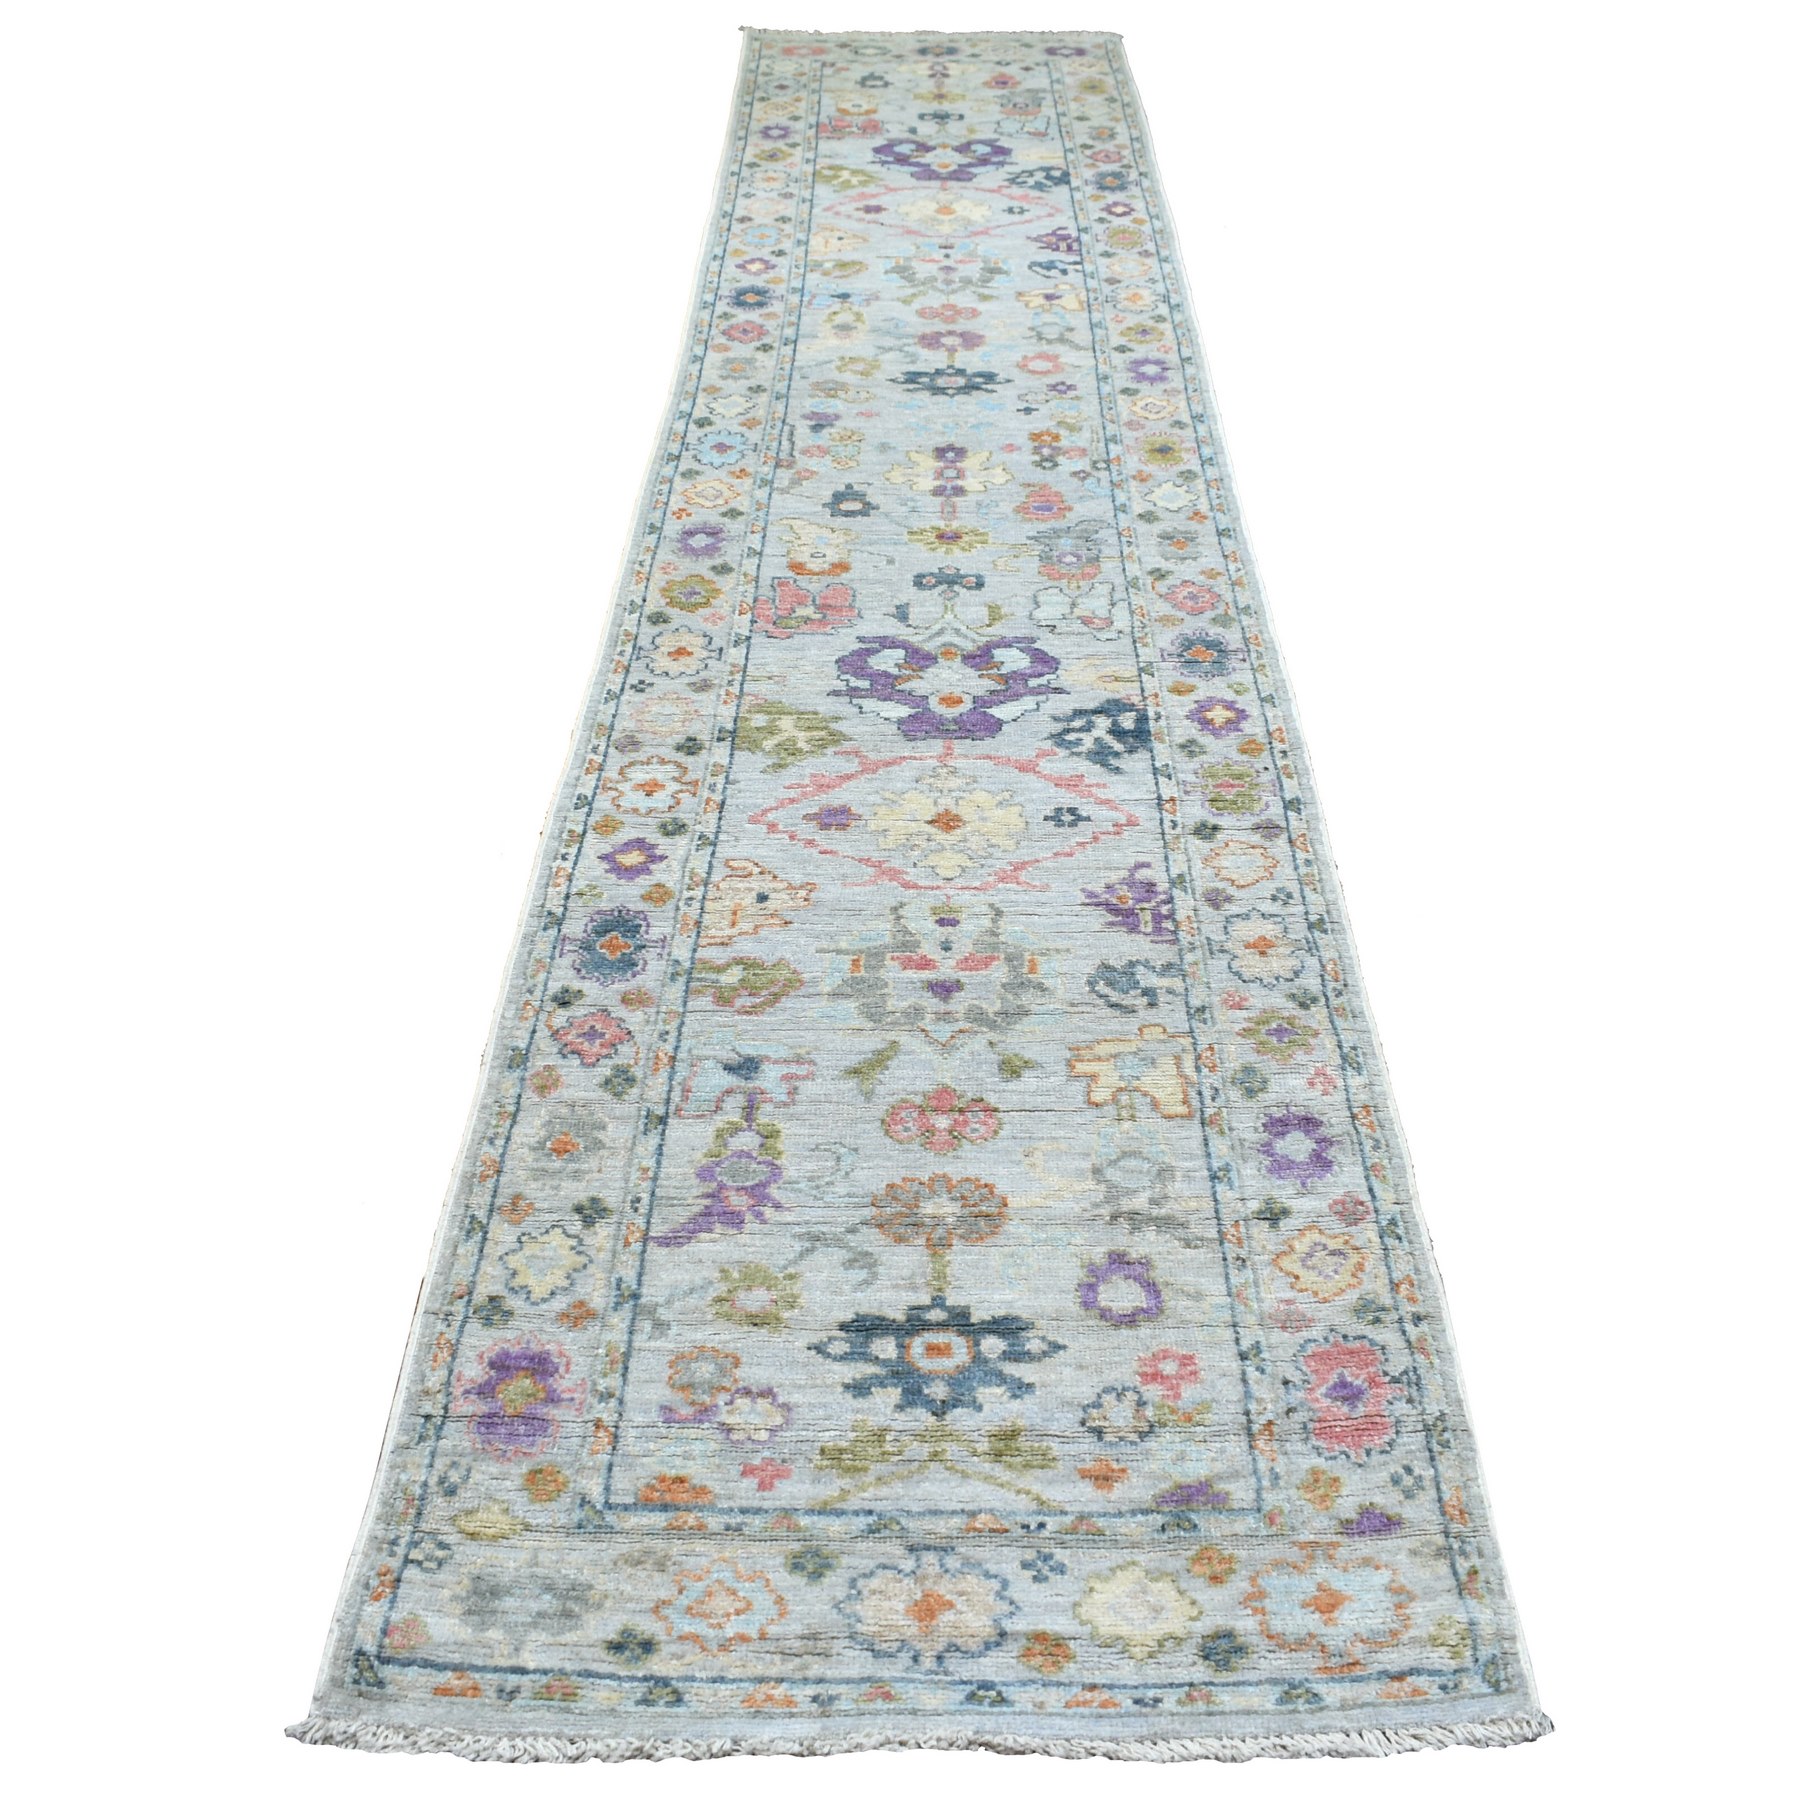 2'10"x14' Afghan Angora Oushak with a Beautiful, Color Pattern Soft and Pliable Wool Hand Woven Silver Gray Oriental XL Runner Rug 